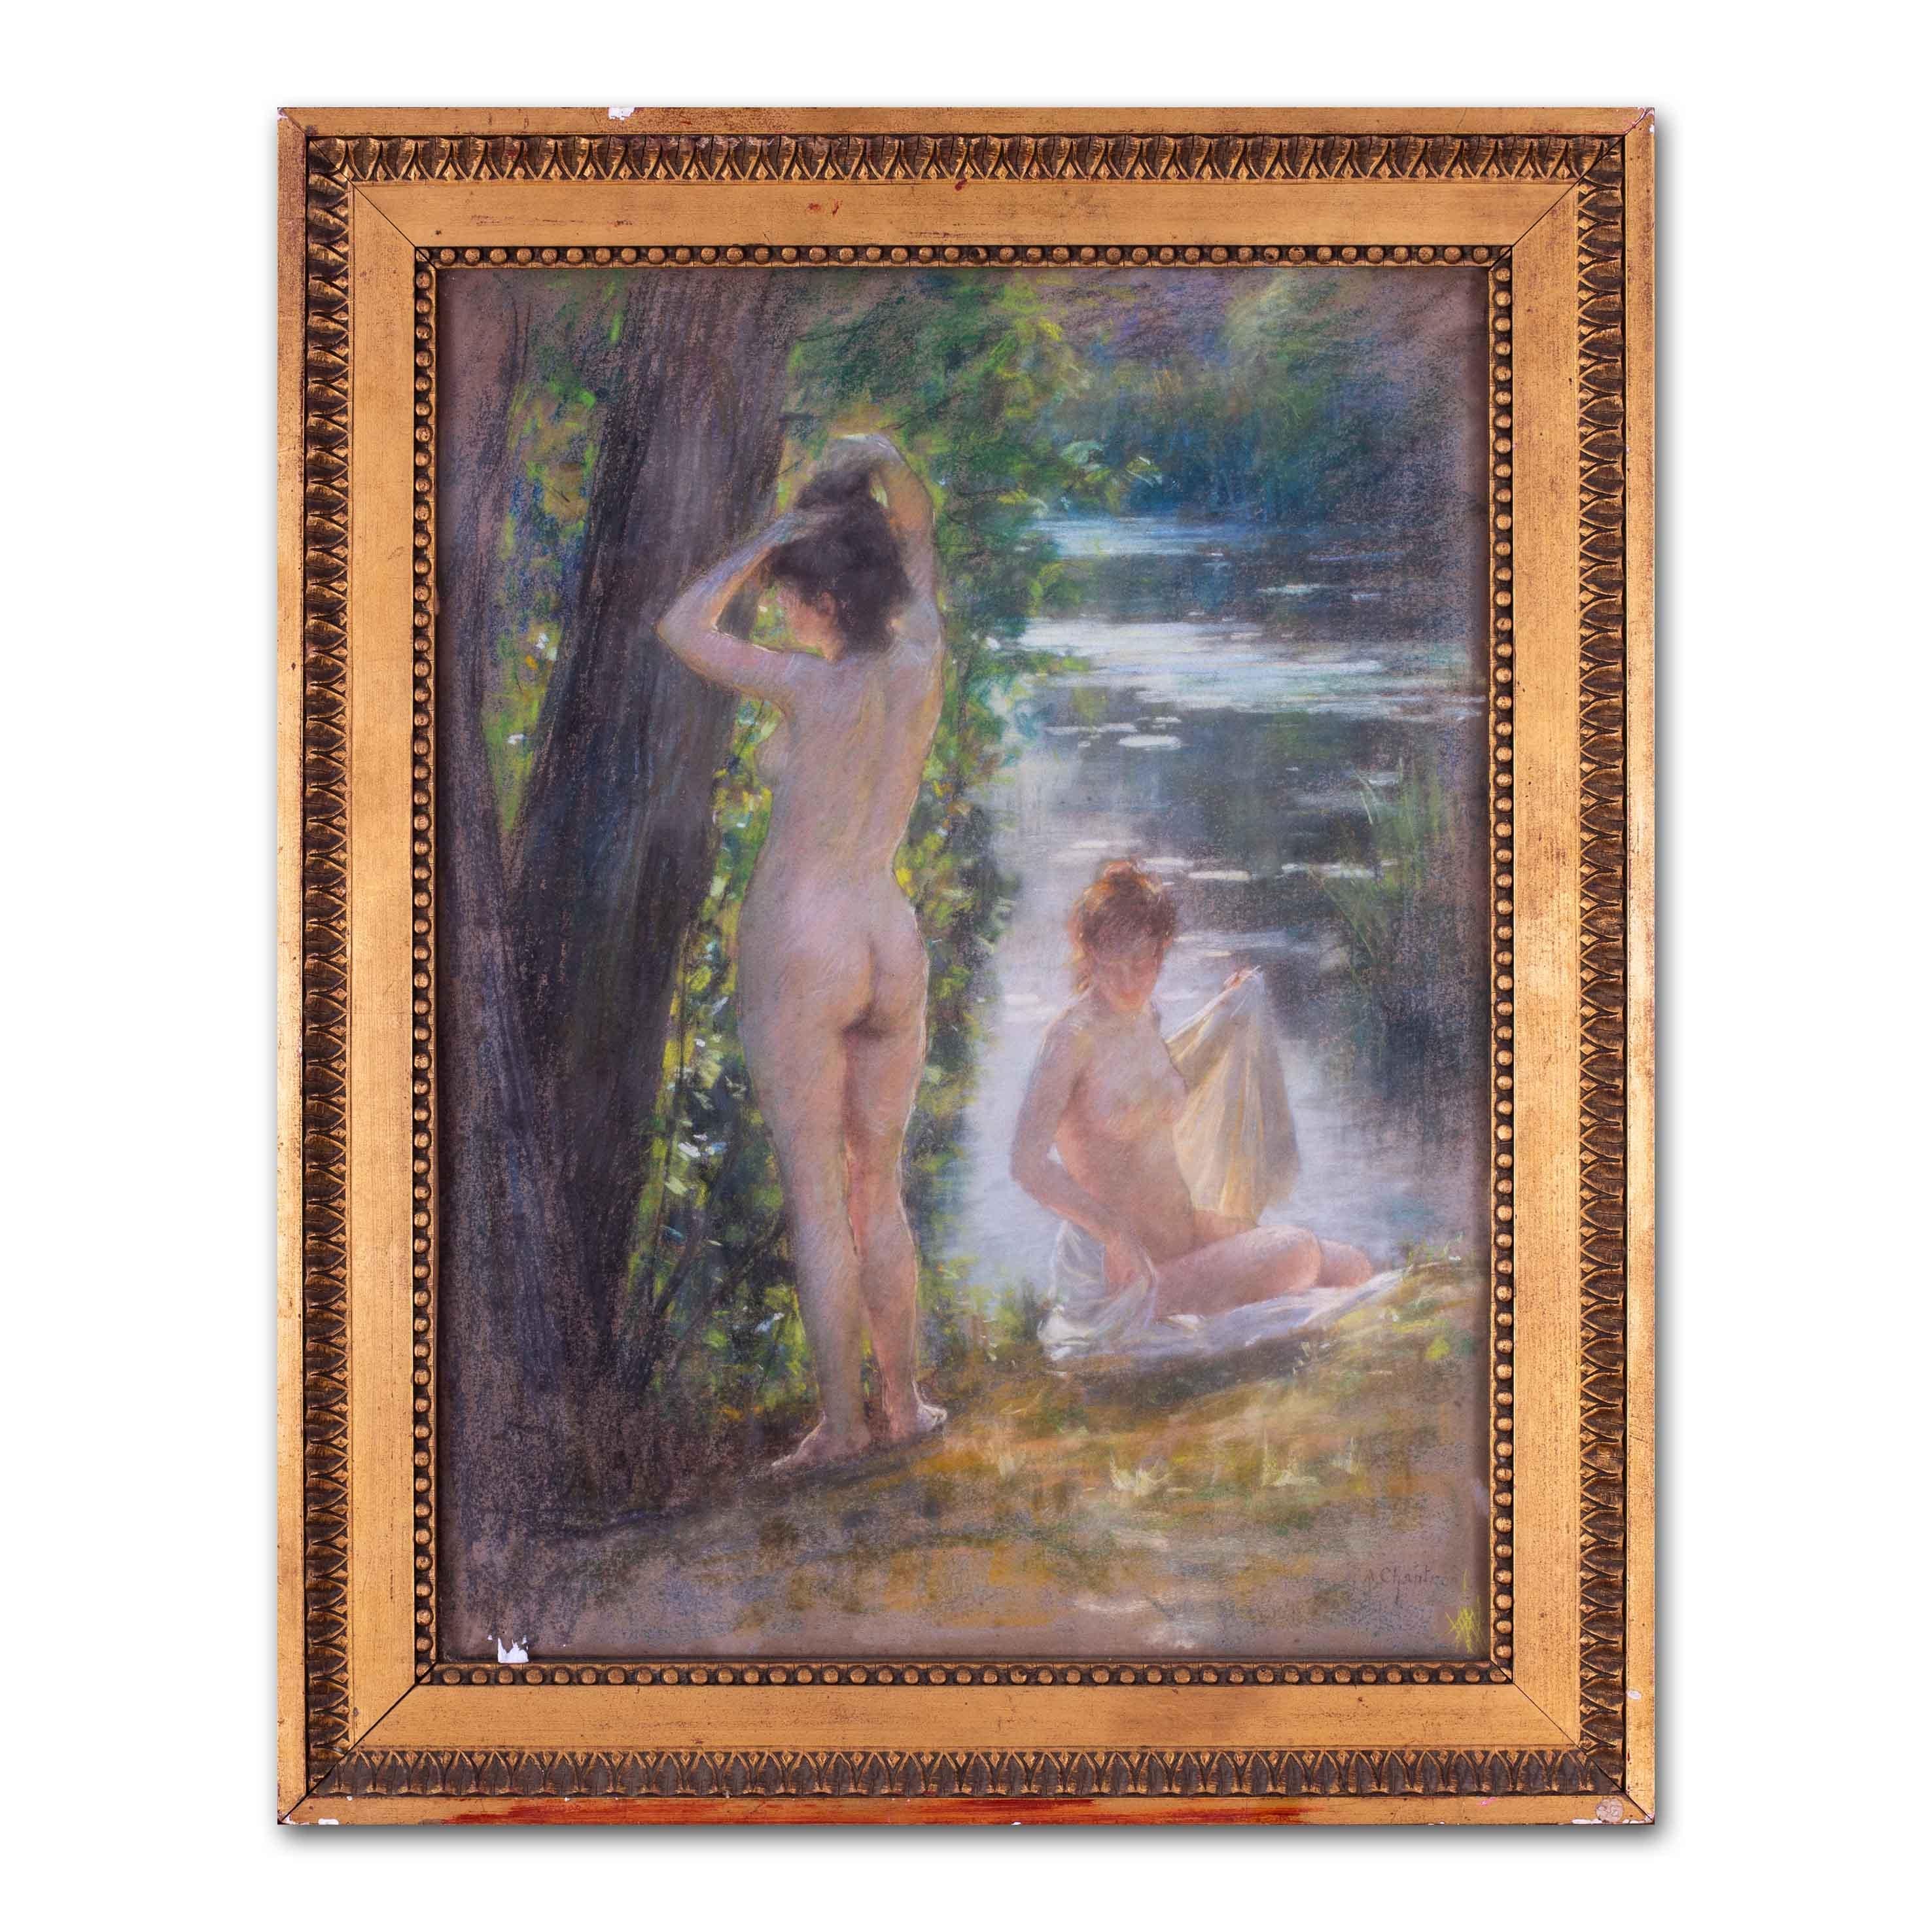 Late 19th Century pastel by Chantron of bathers by the side of a river - Gray Figurative Art by Alexandre Jacques Chantron